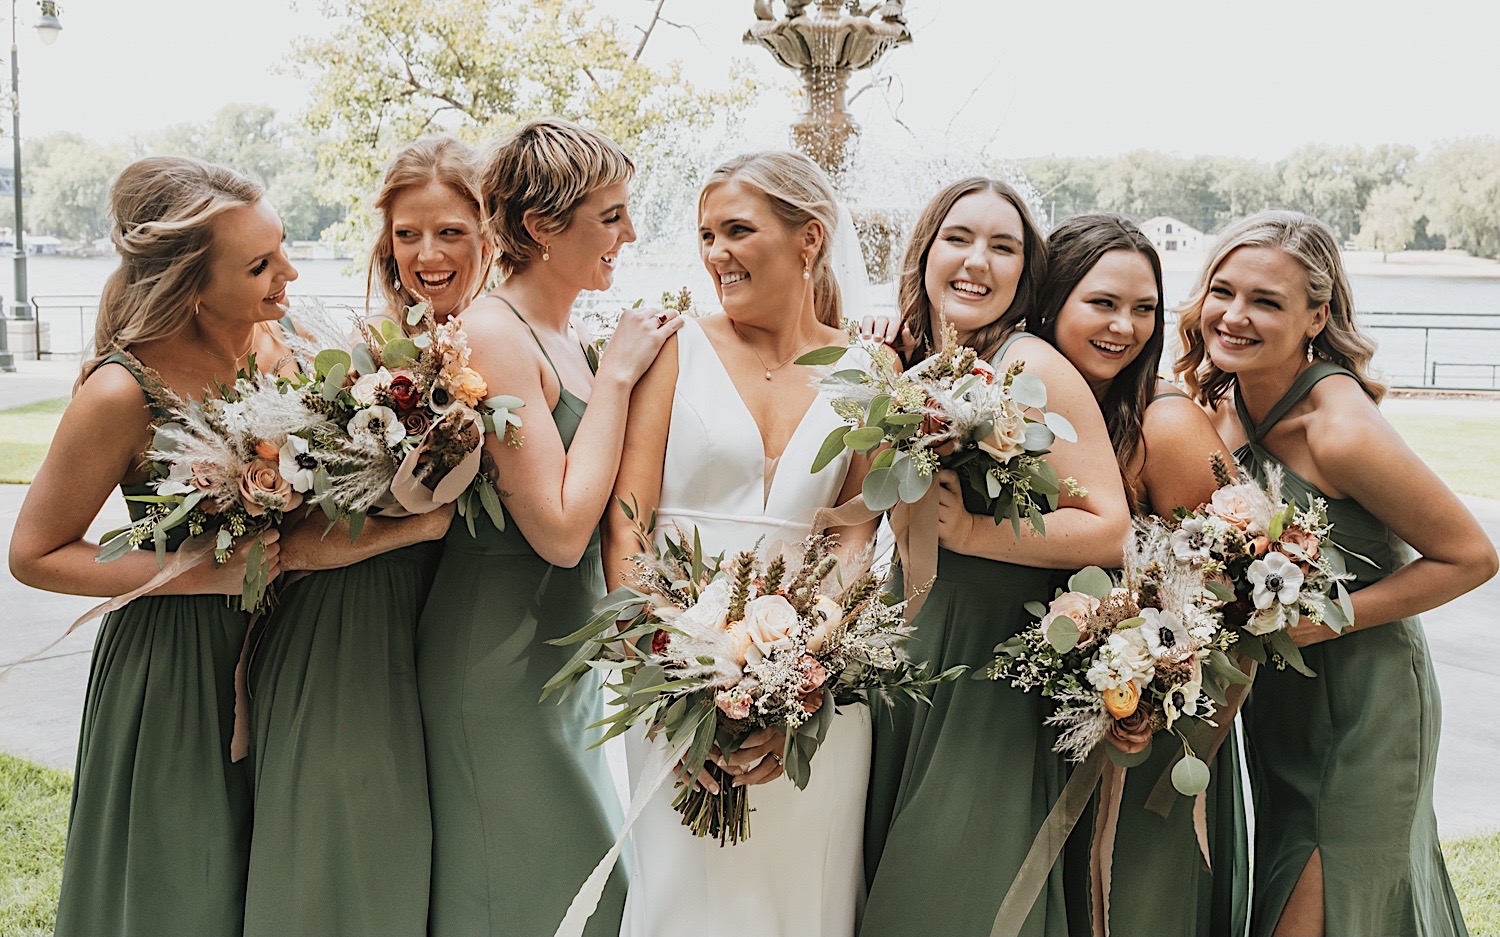 A bride smiles as her bridesmaids all surround her and smile